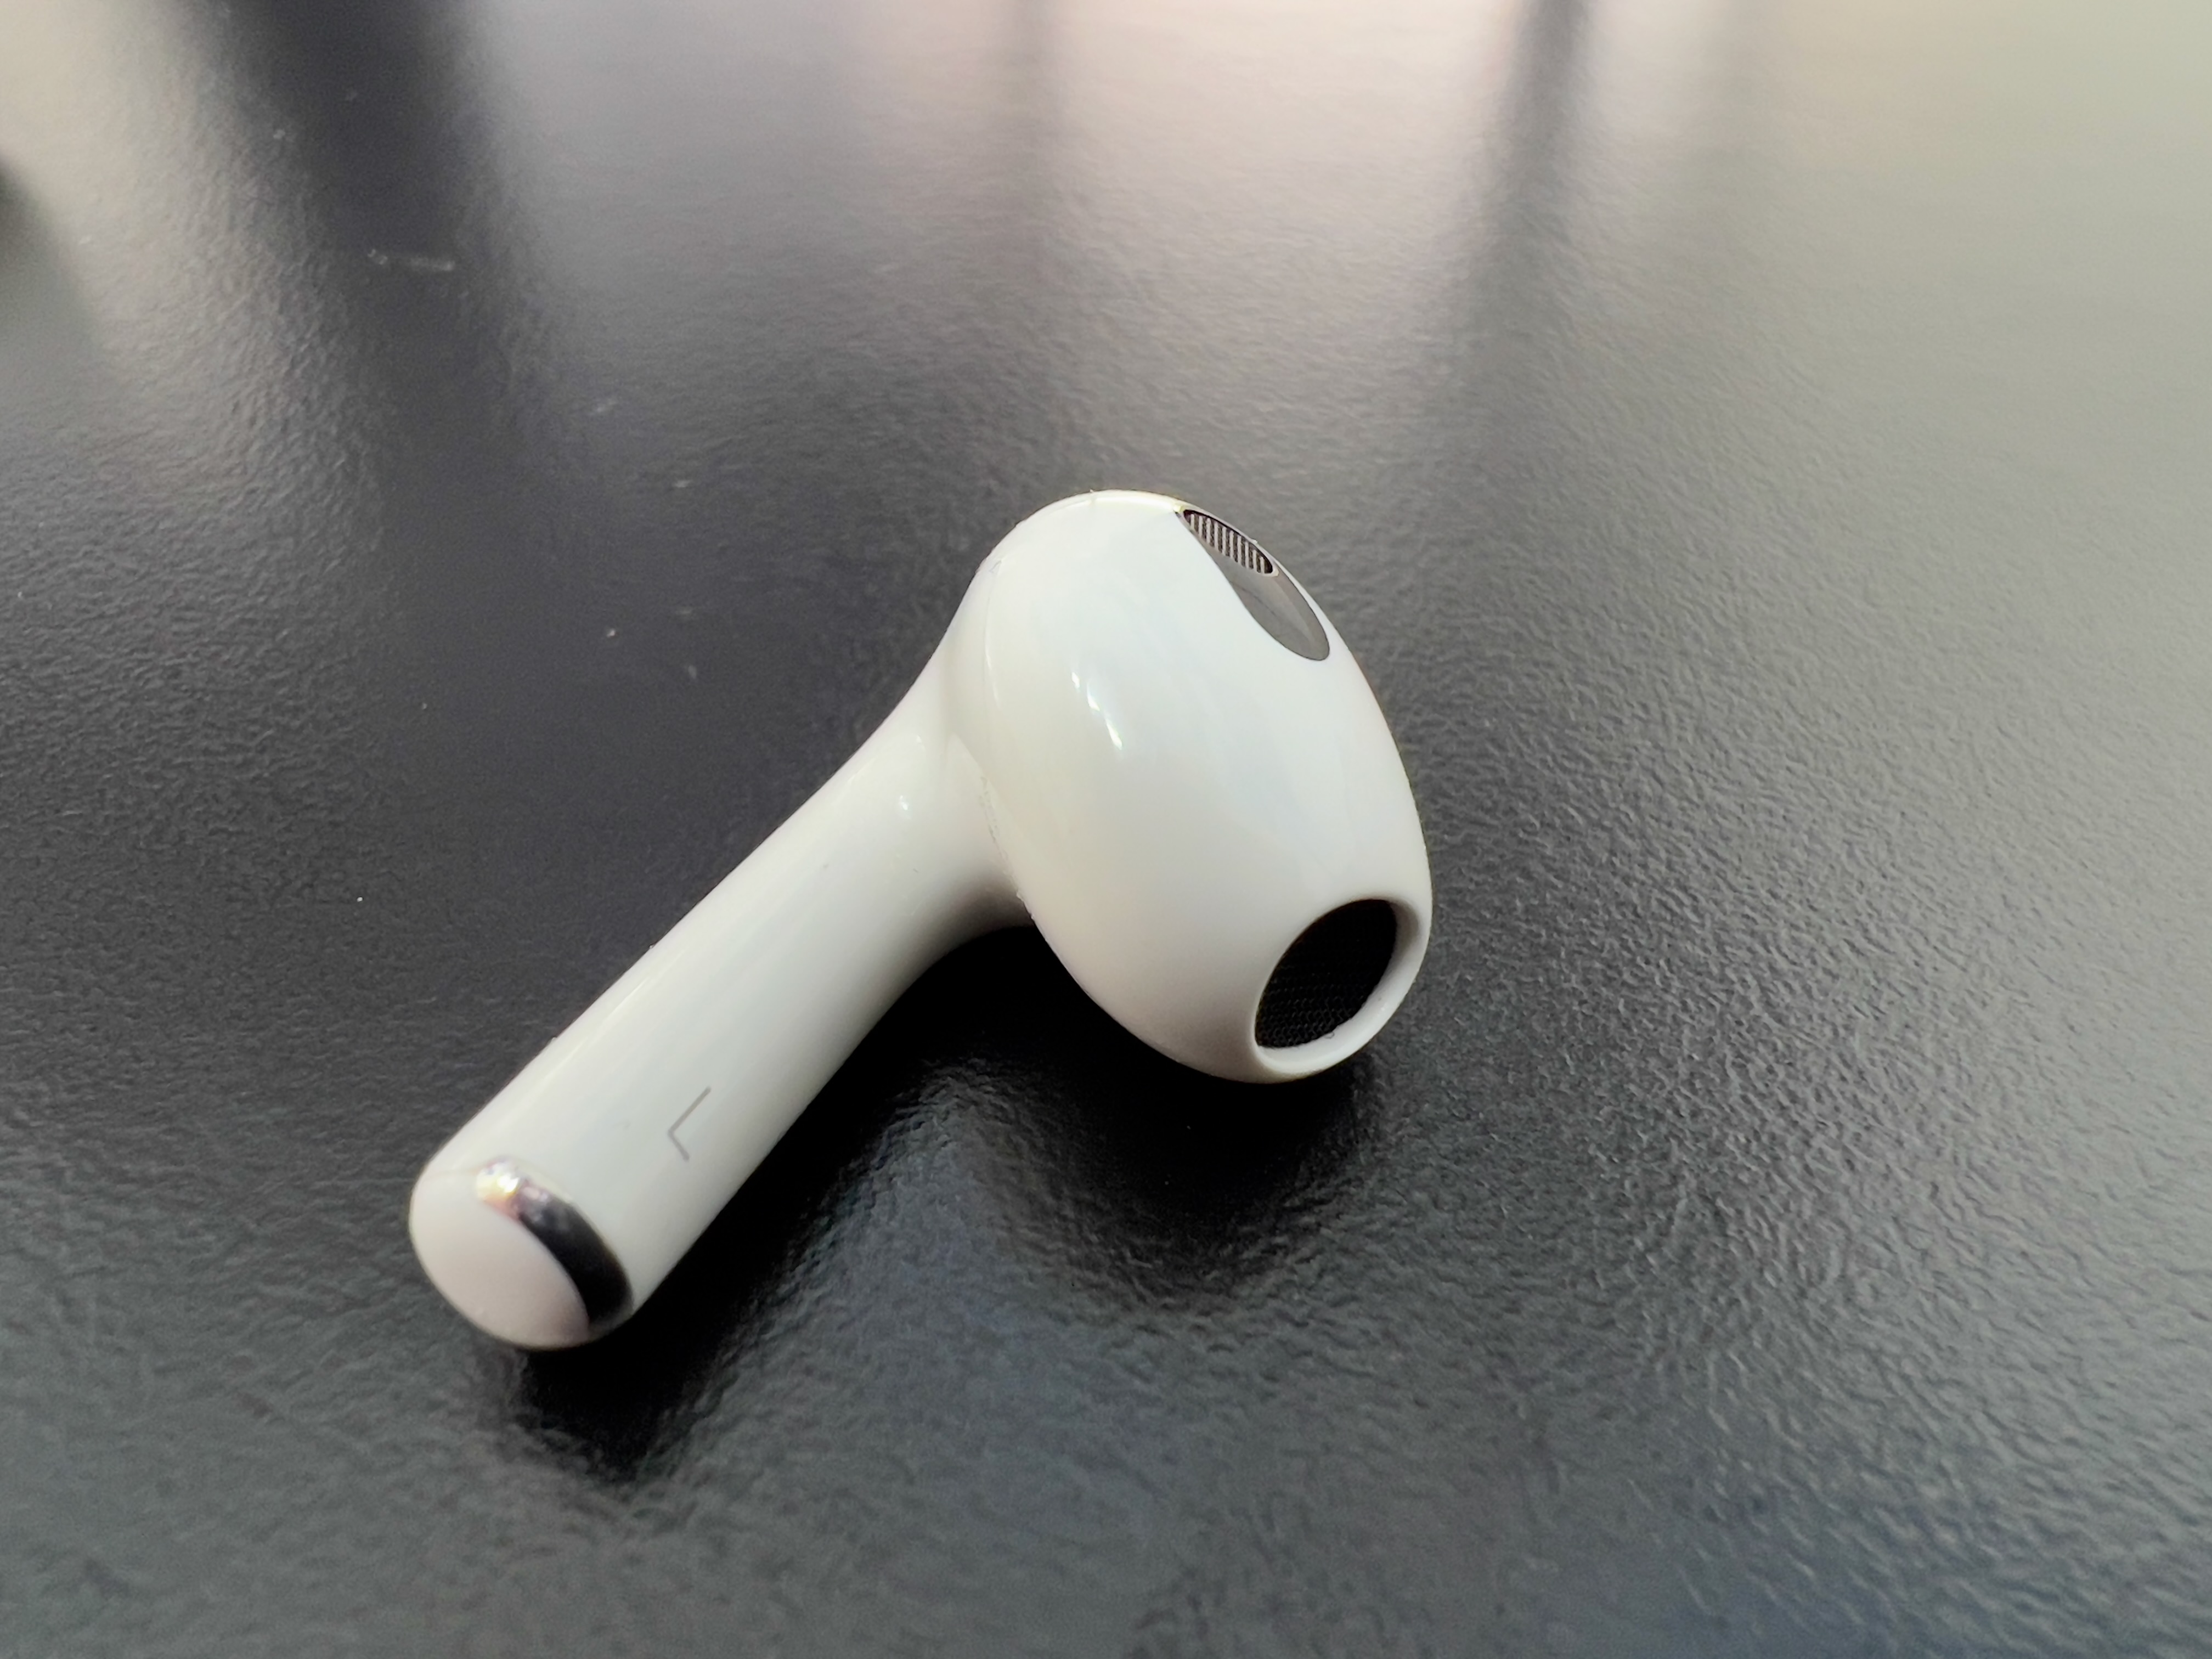 AirPods 3rd Generation Review: Better Sound, New Design, Spatial Audio